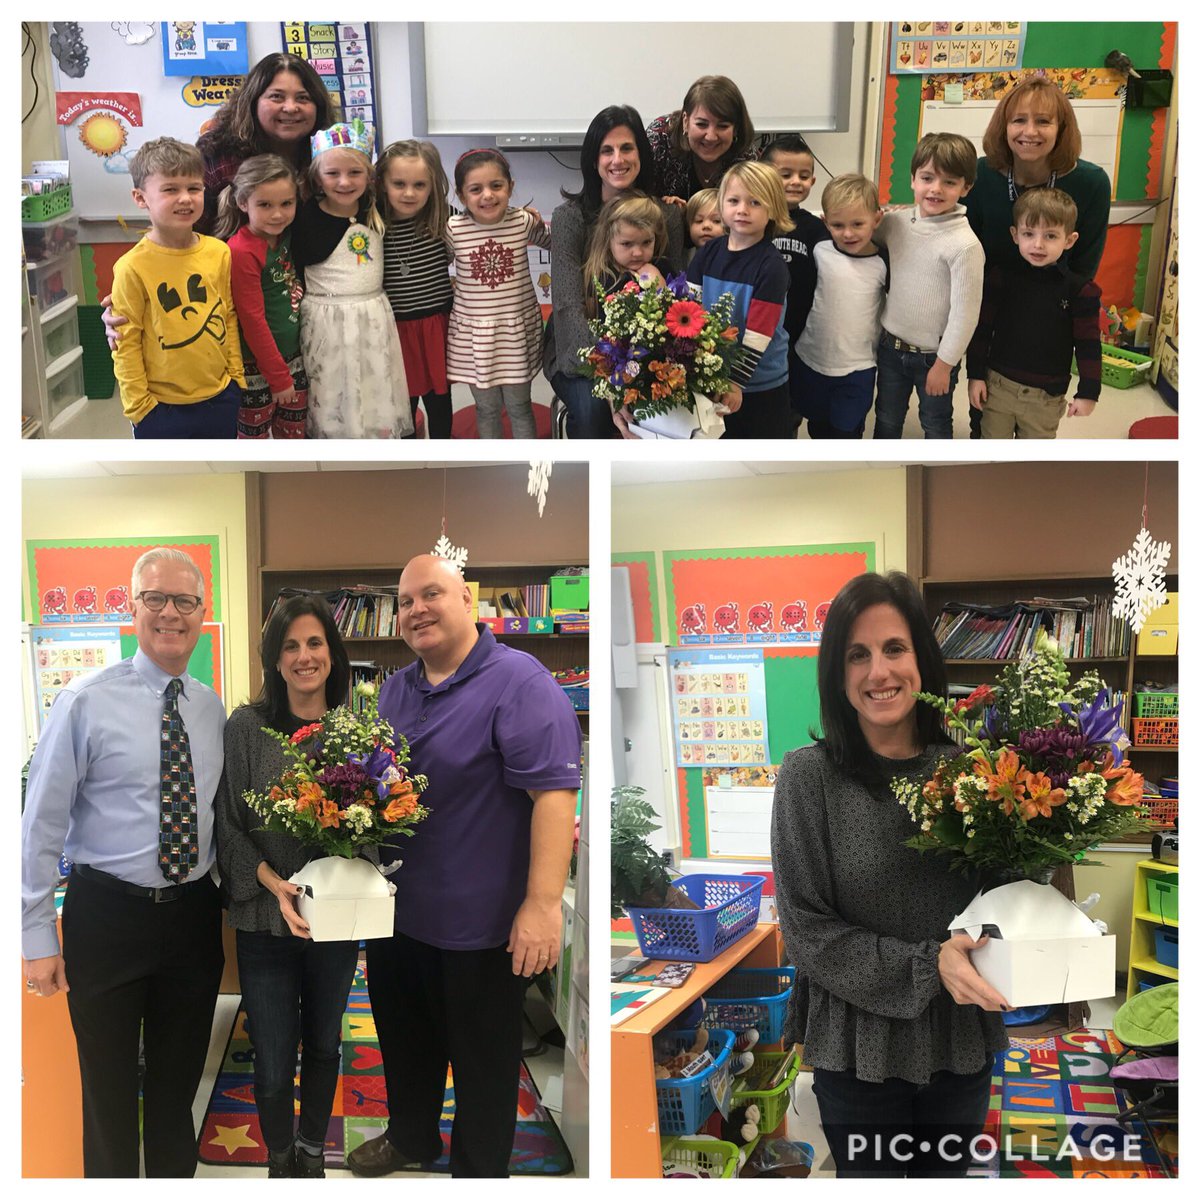 So proud and excited to have Tracy Pennell on being selected as our MB Teacher of the Year!!  Mrs. Pennell inspires us all with her work in preschool every day!  #MBSpride #teacherrecognition